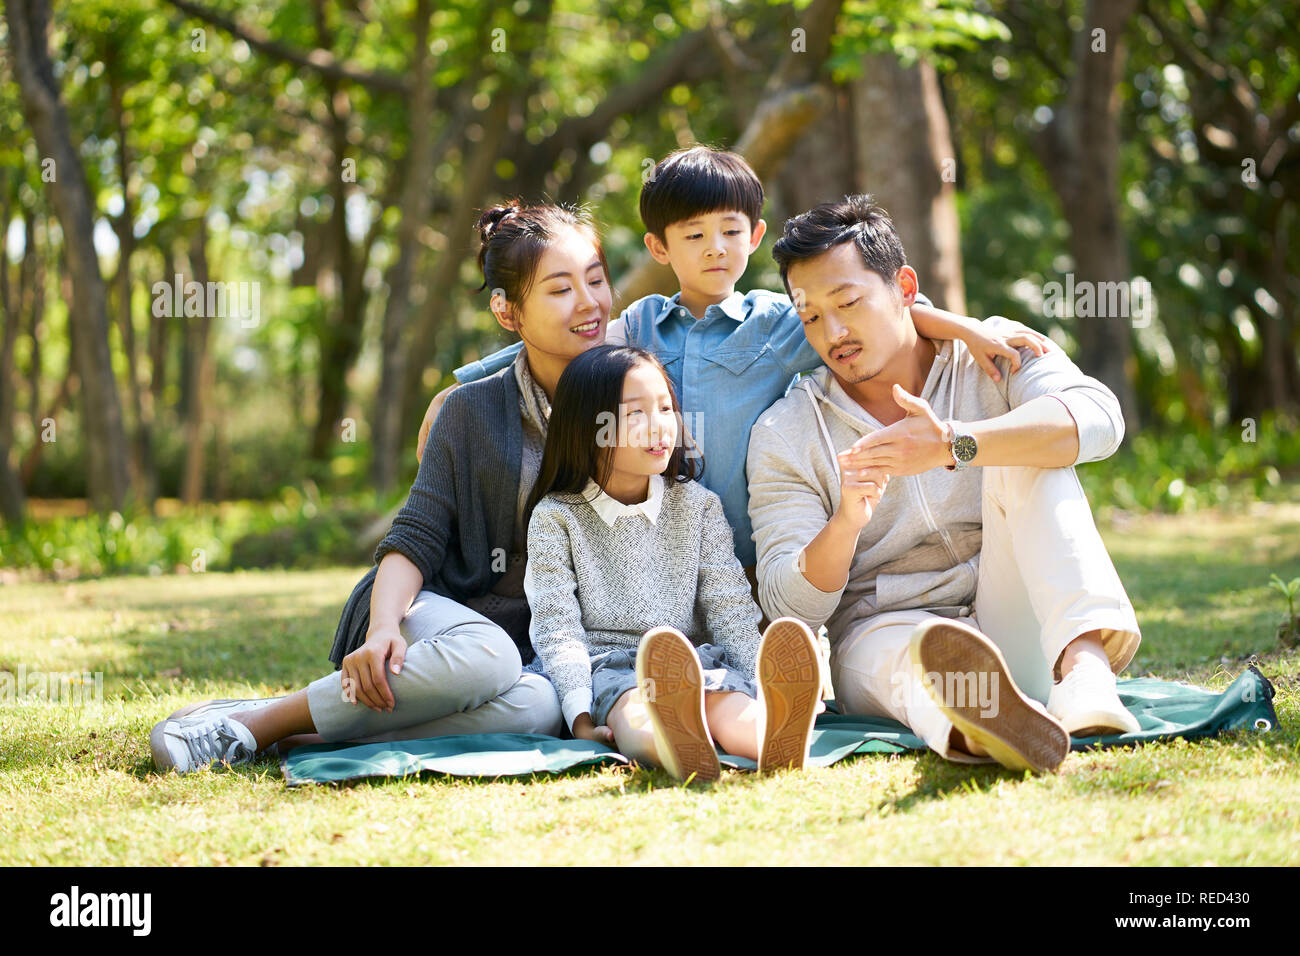 asian family with two children having fun sitting on grass talking chatting outdoors in park Stock Photo